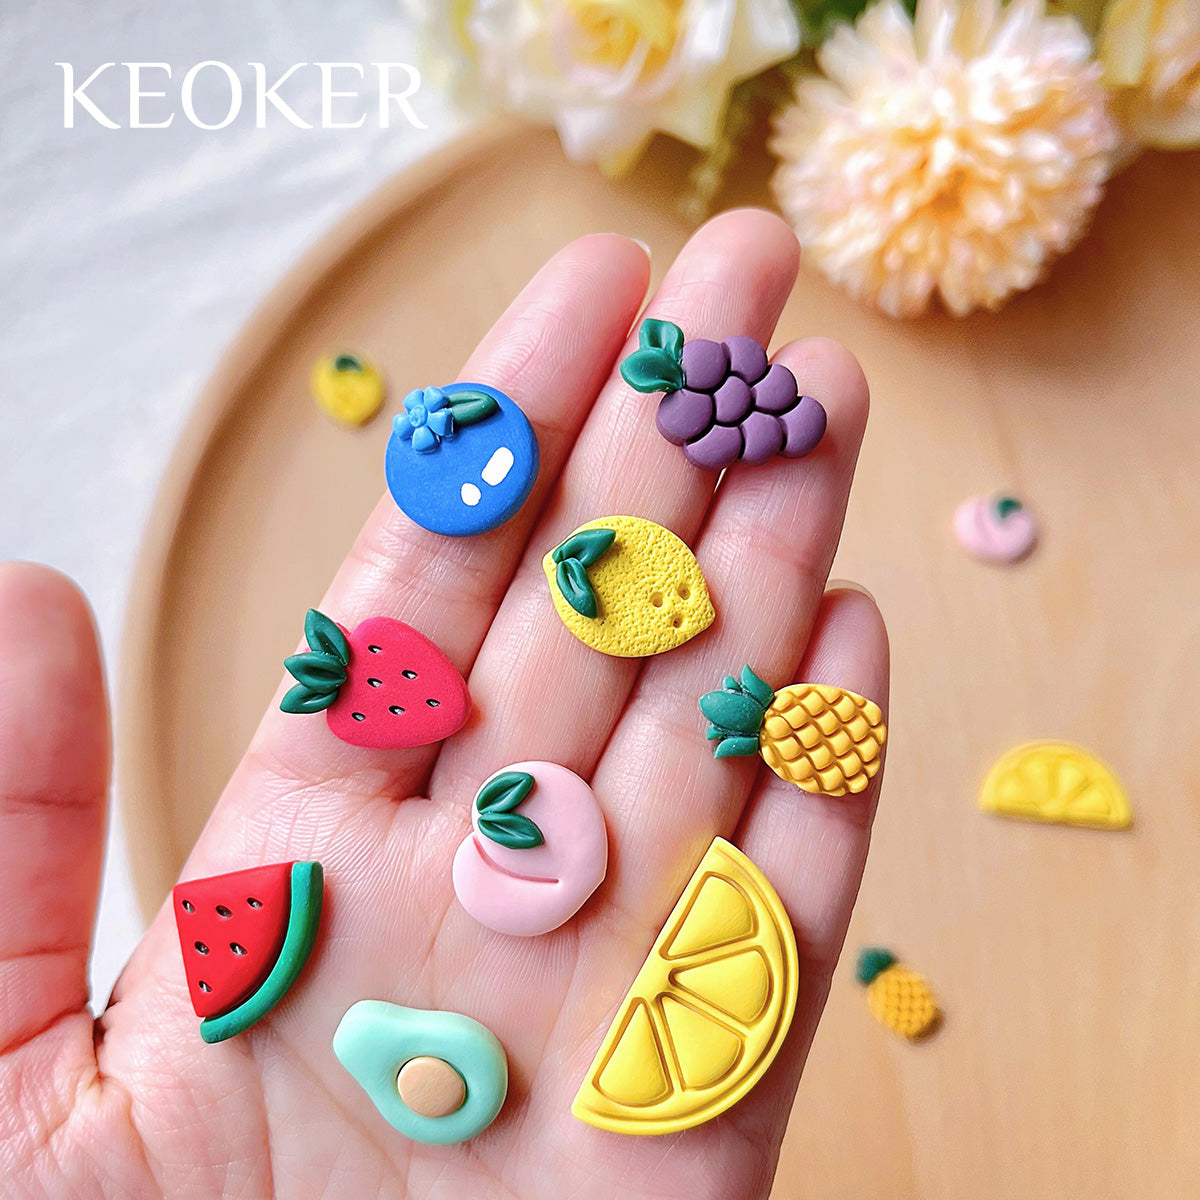 Keoker Polymer Clay Bead Roller, Polymer Clay Earrings Tools